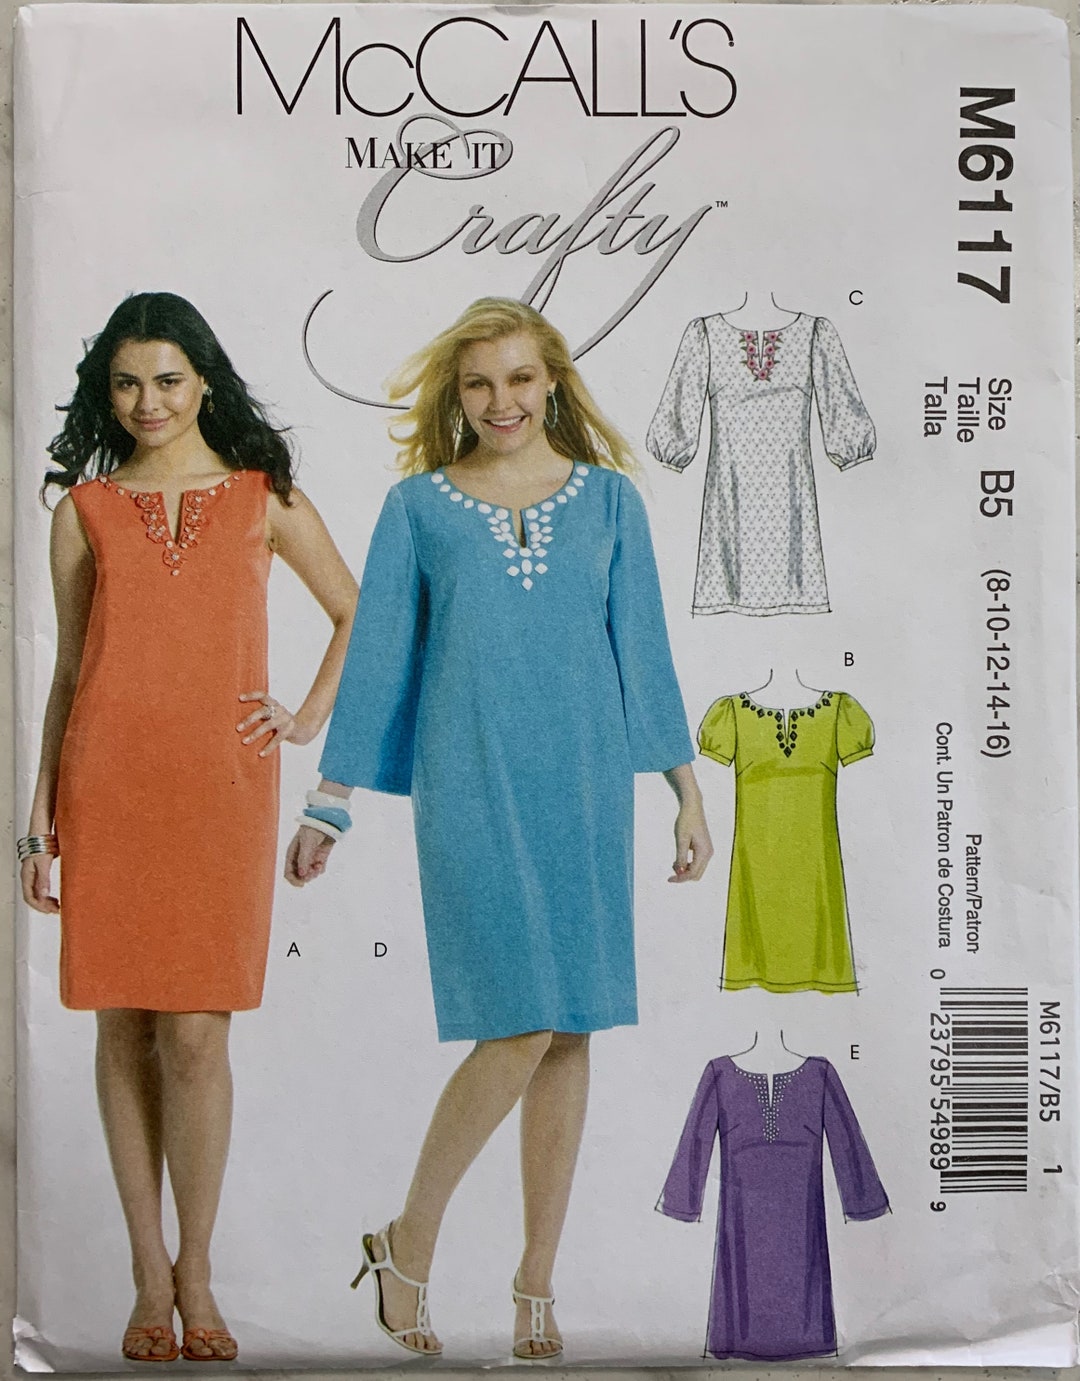 Mccall's Sewing Pattern 6117 Uncut and Factory Folded - Etsy